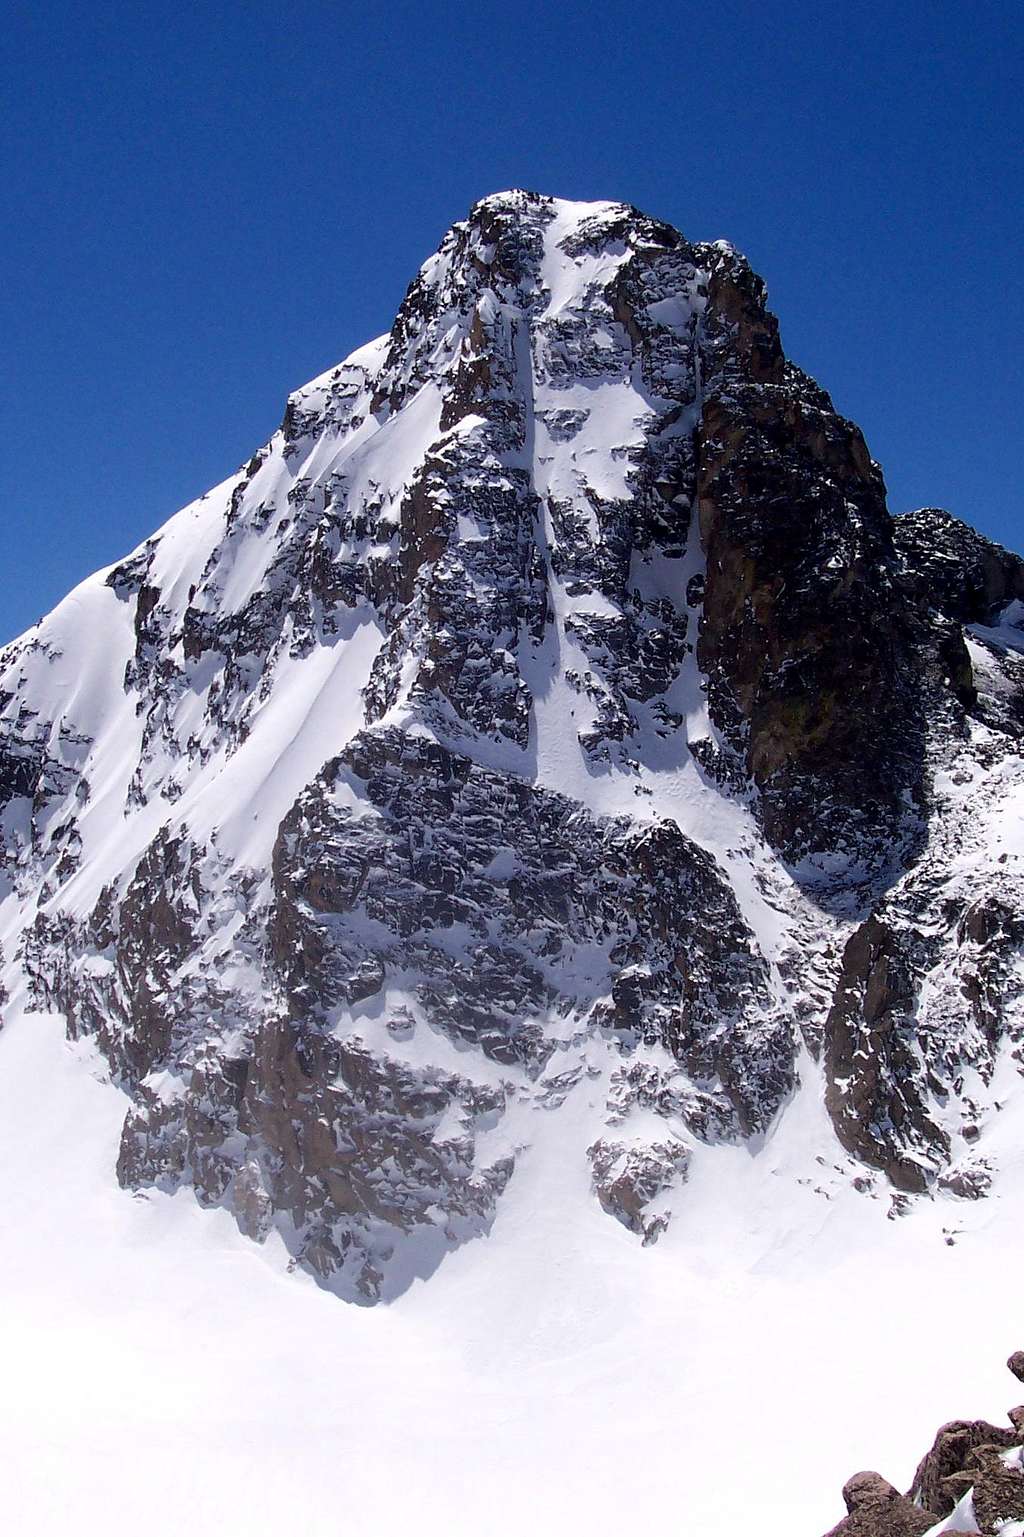 North Face of Mt Toll